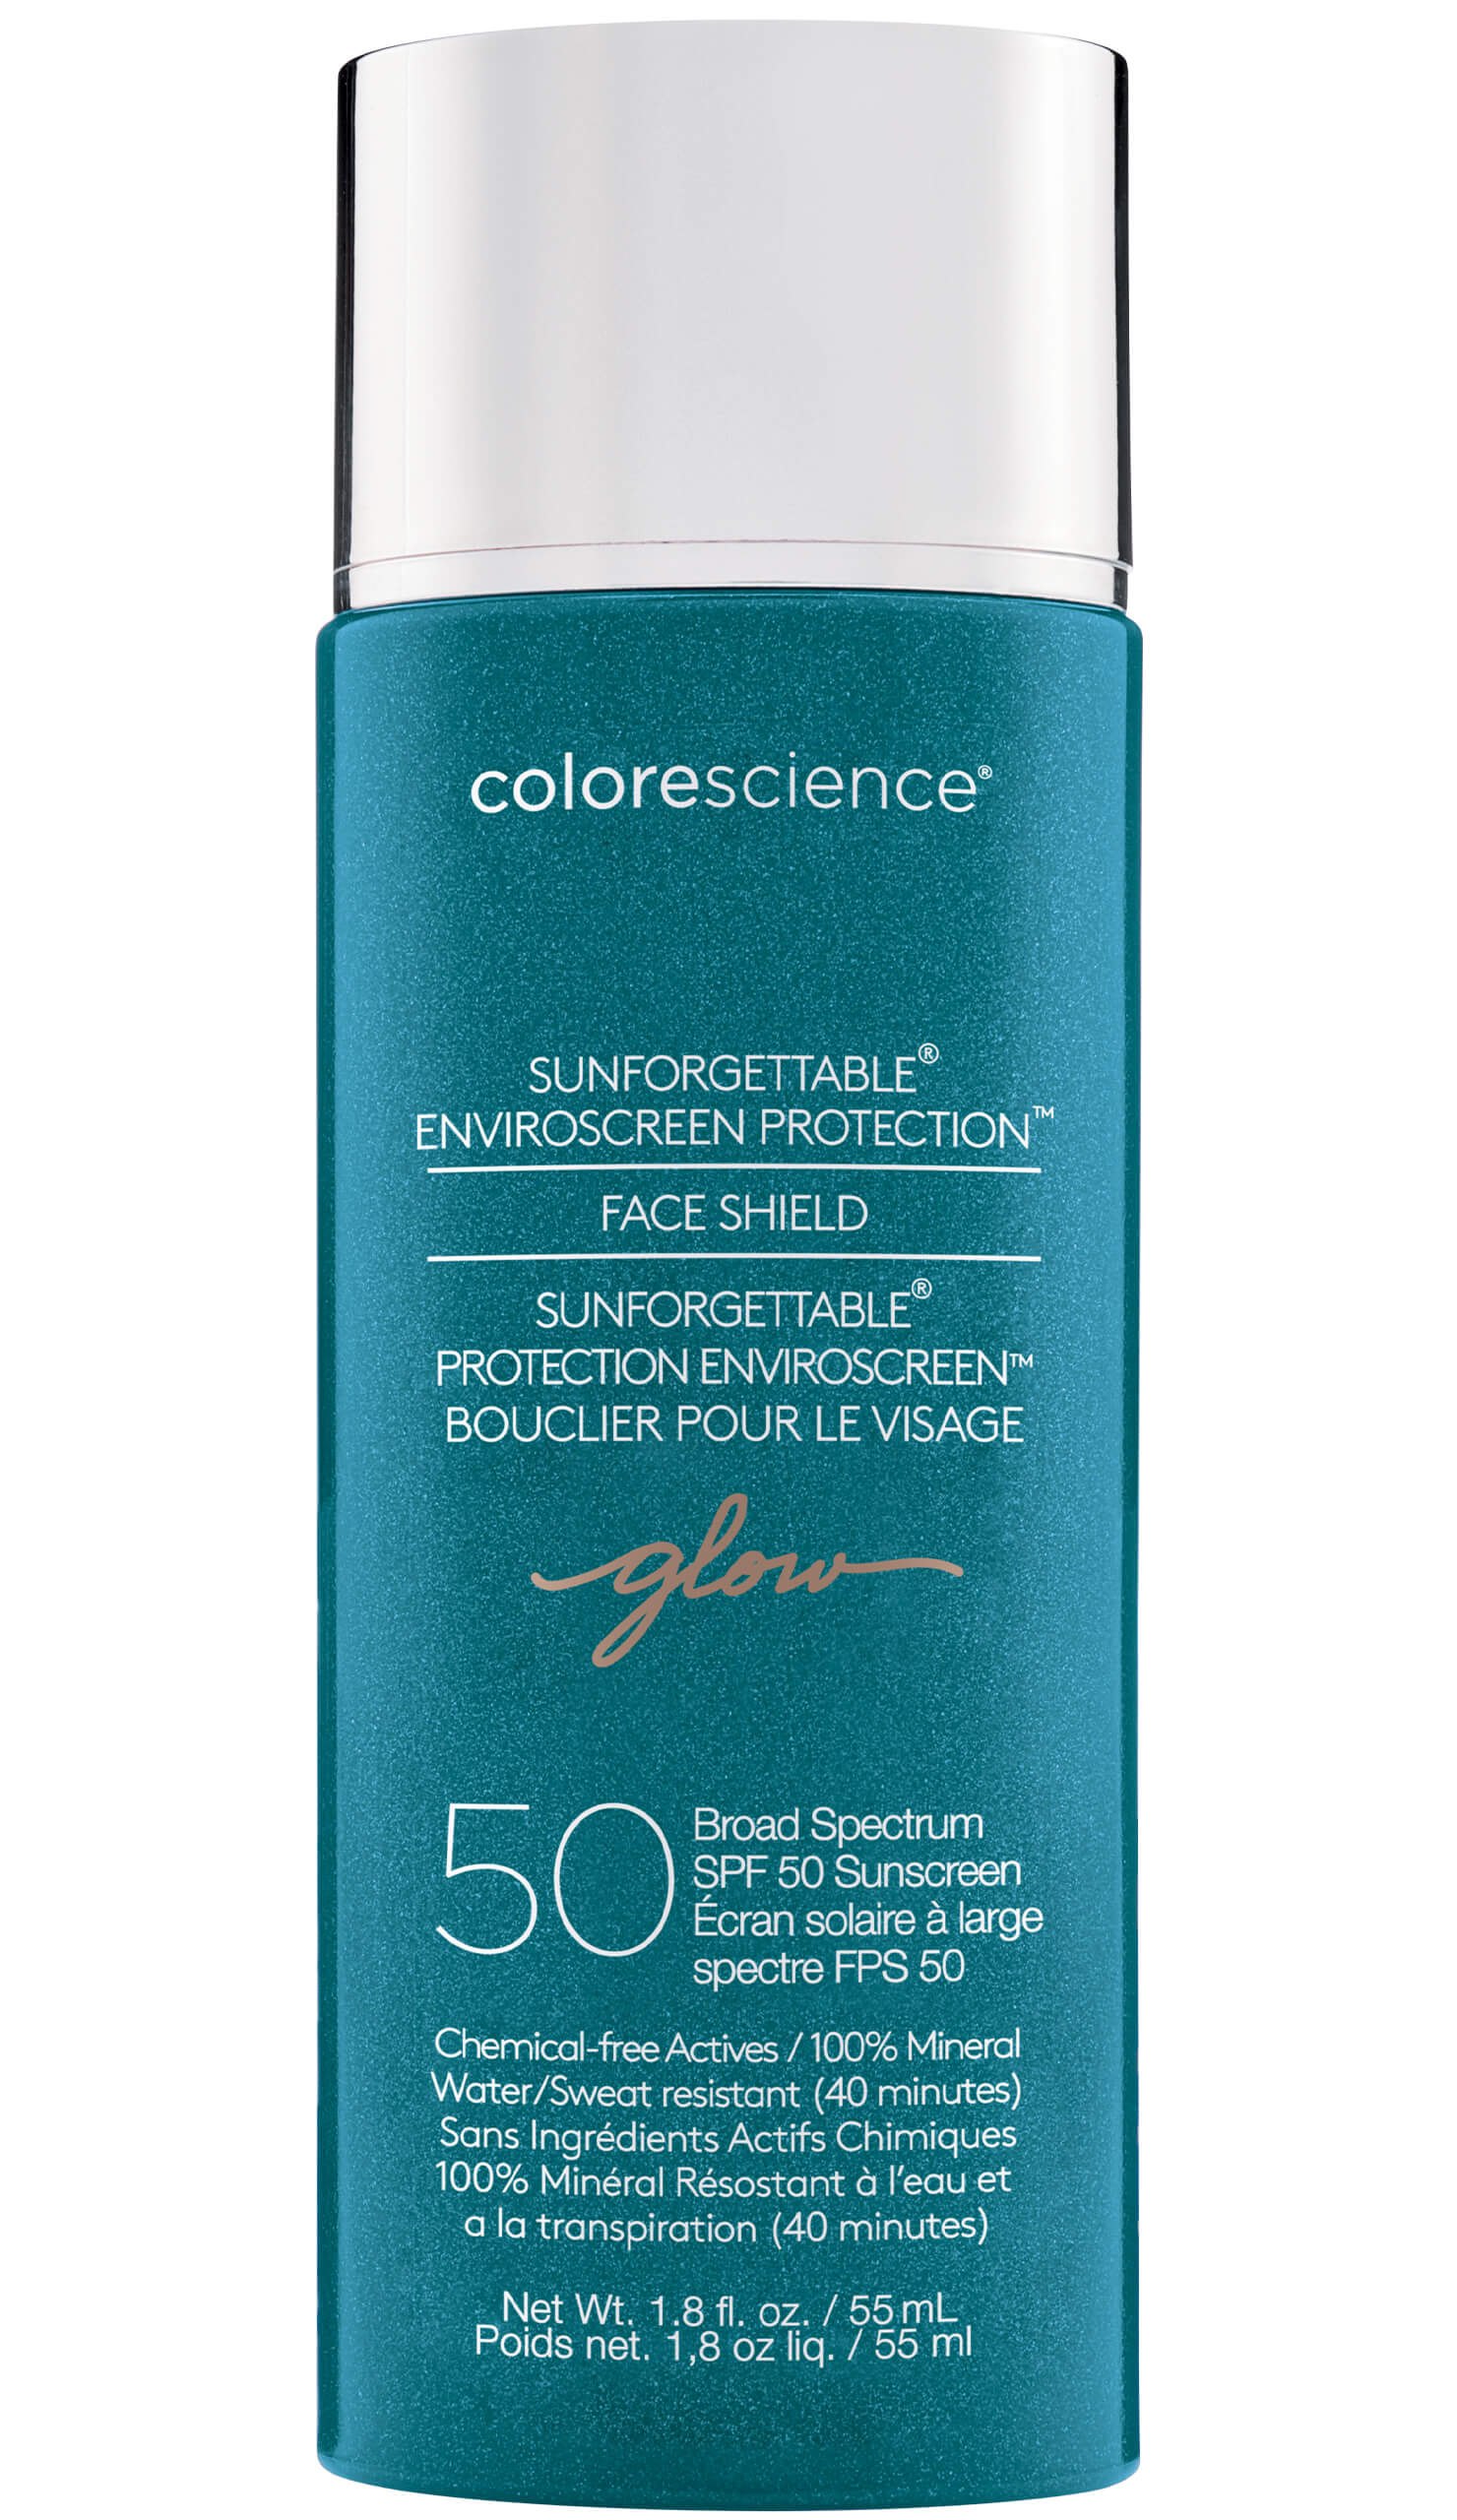 https://www.bclaserandskincare.com/wp-content/uploads/sunforgettable-total-protection-glow-face-shield-sunscreen-single-product-1480x2560-1.jpg